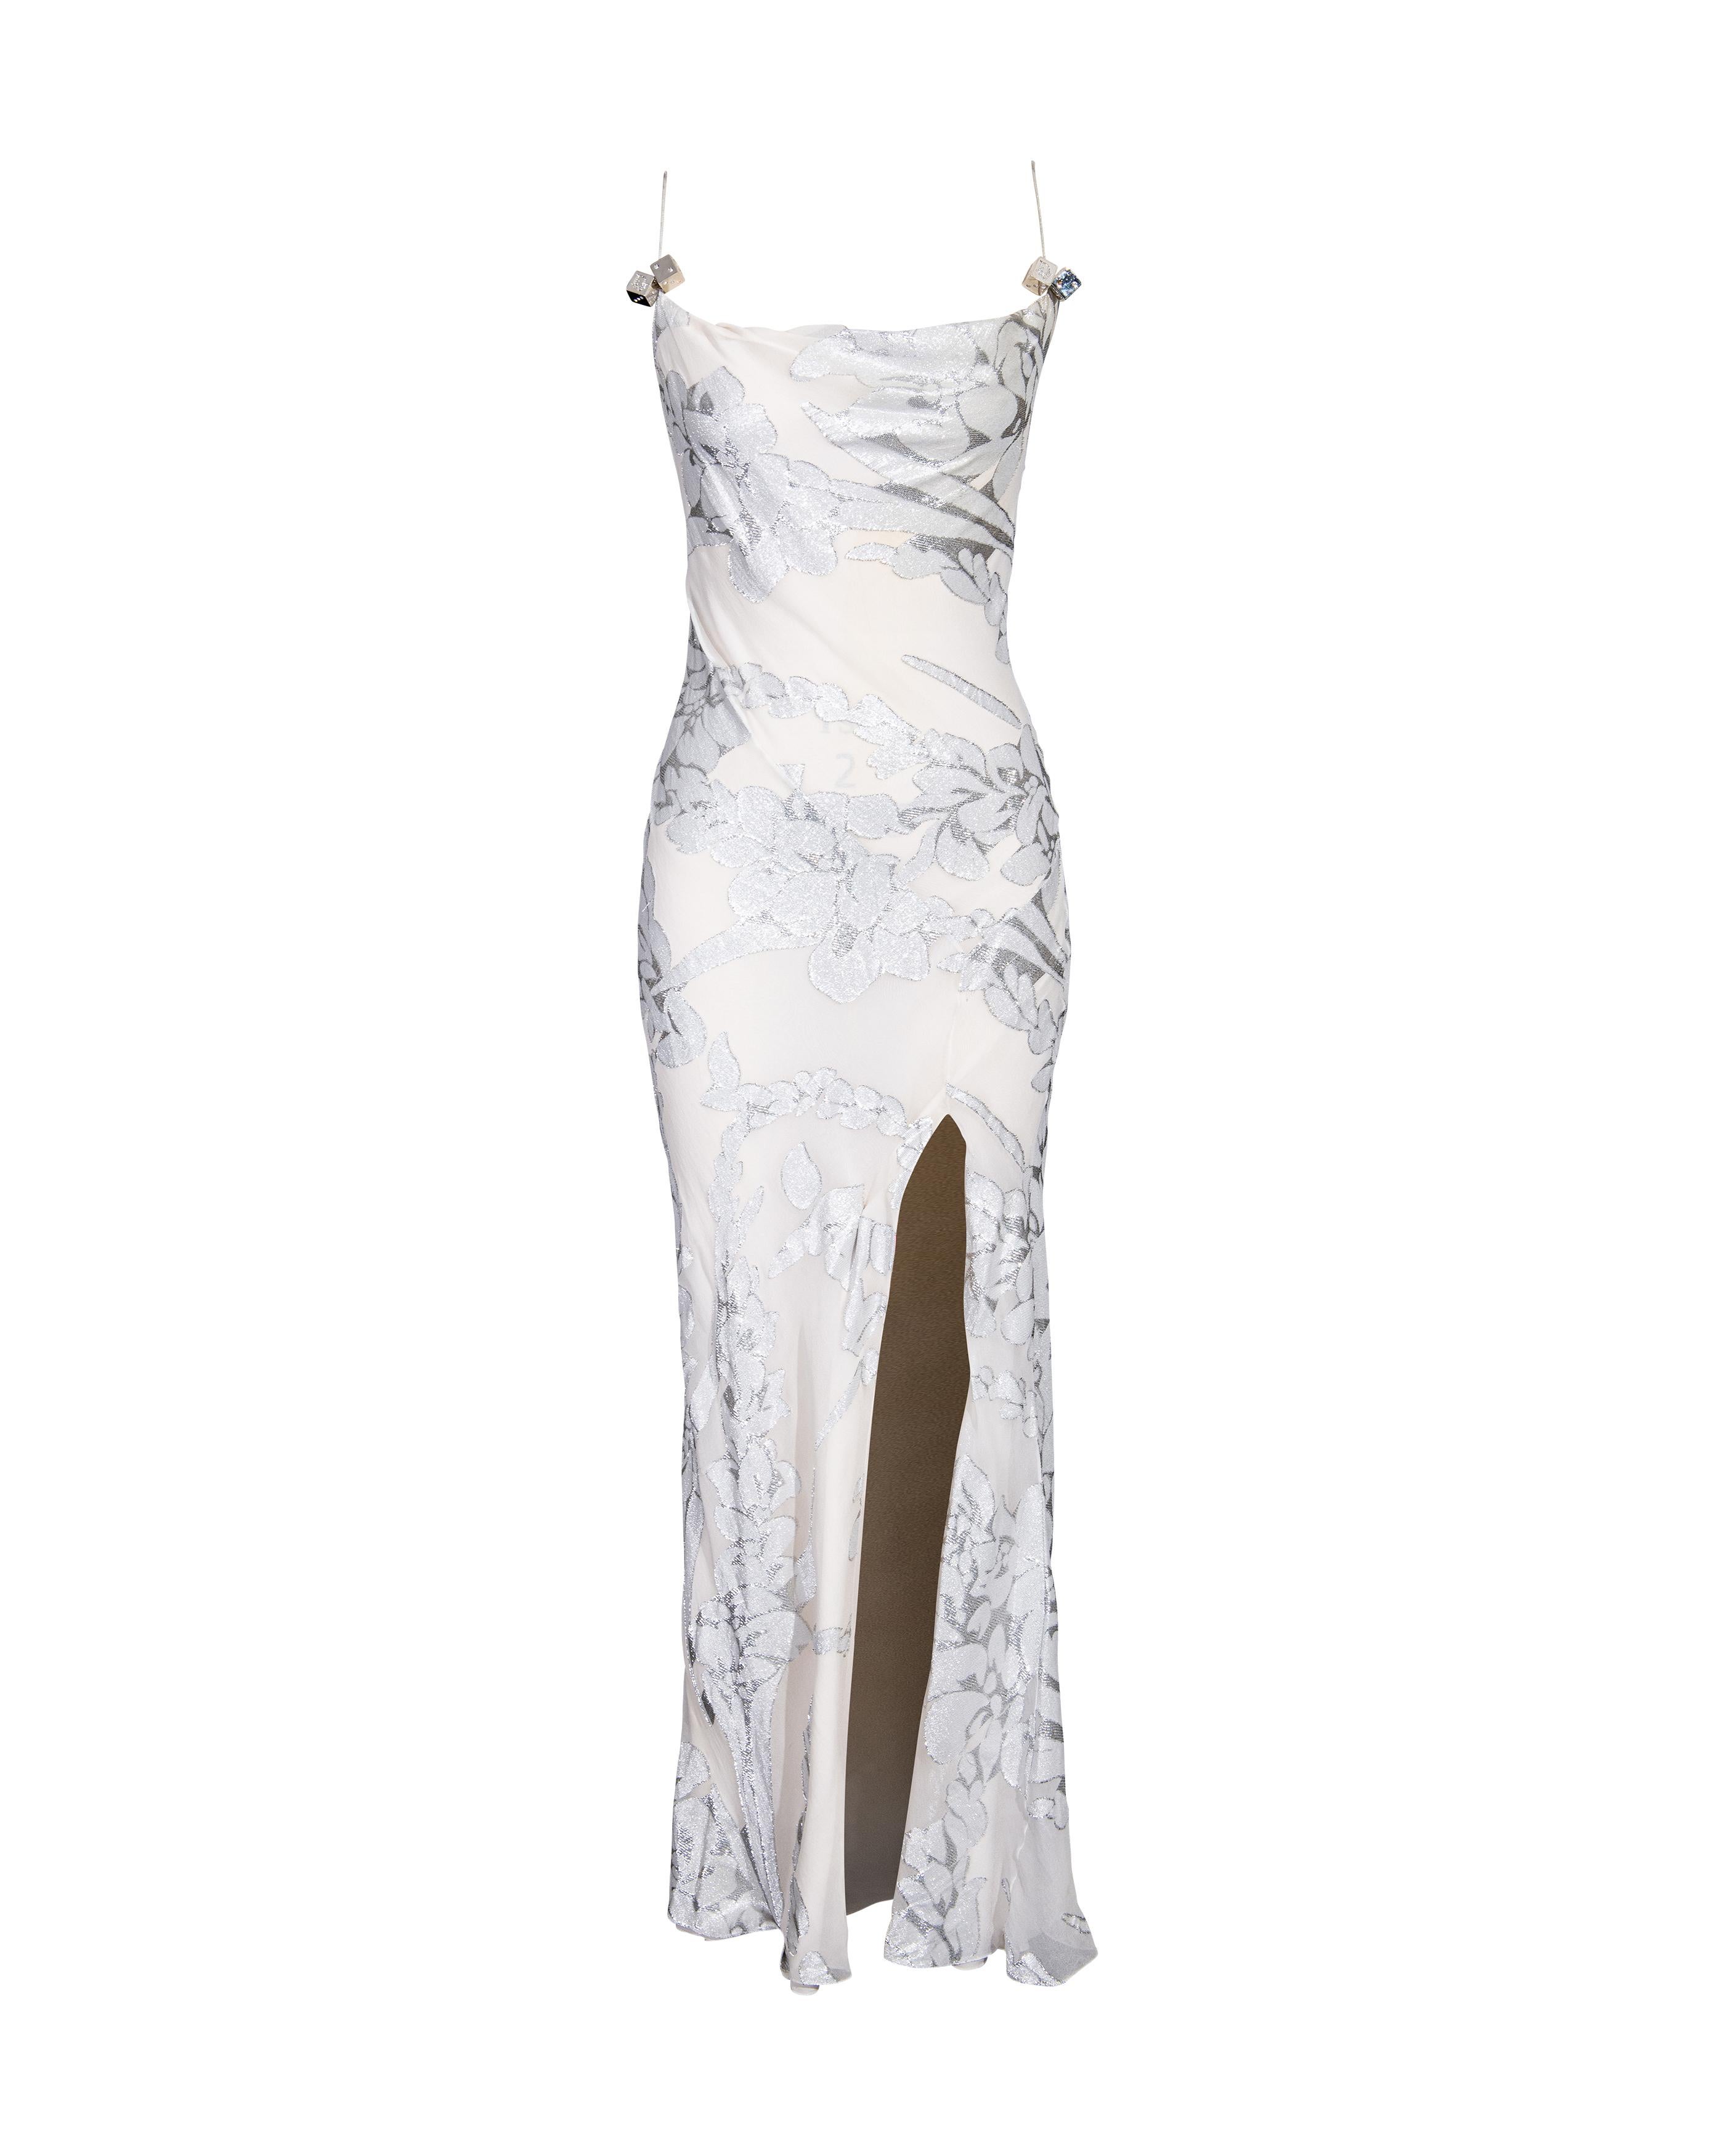 A/W 2004 Christian Dior by John Galliano  Ivory and Silver Lamé Bias Cut Gown 1